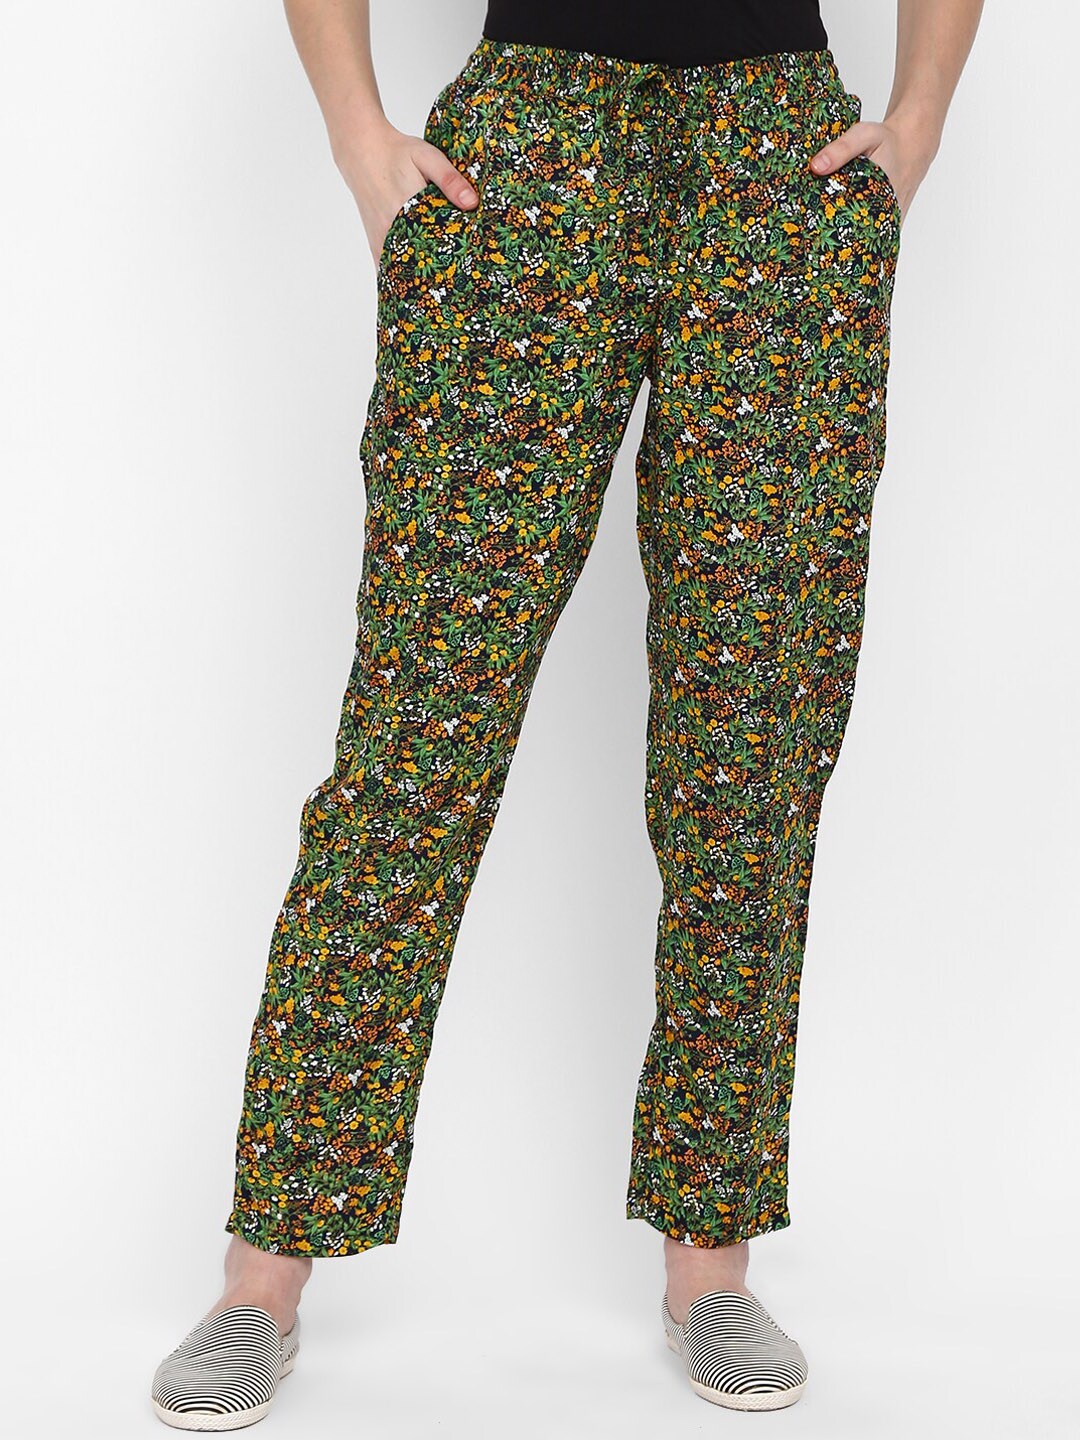 V-Mart Women Green & Black Floral Printed Lounge Pants Price in India